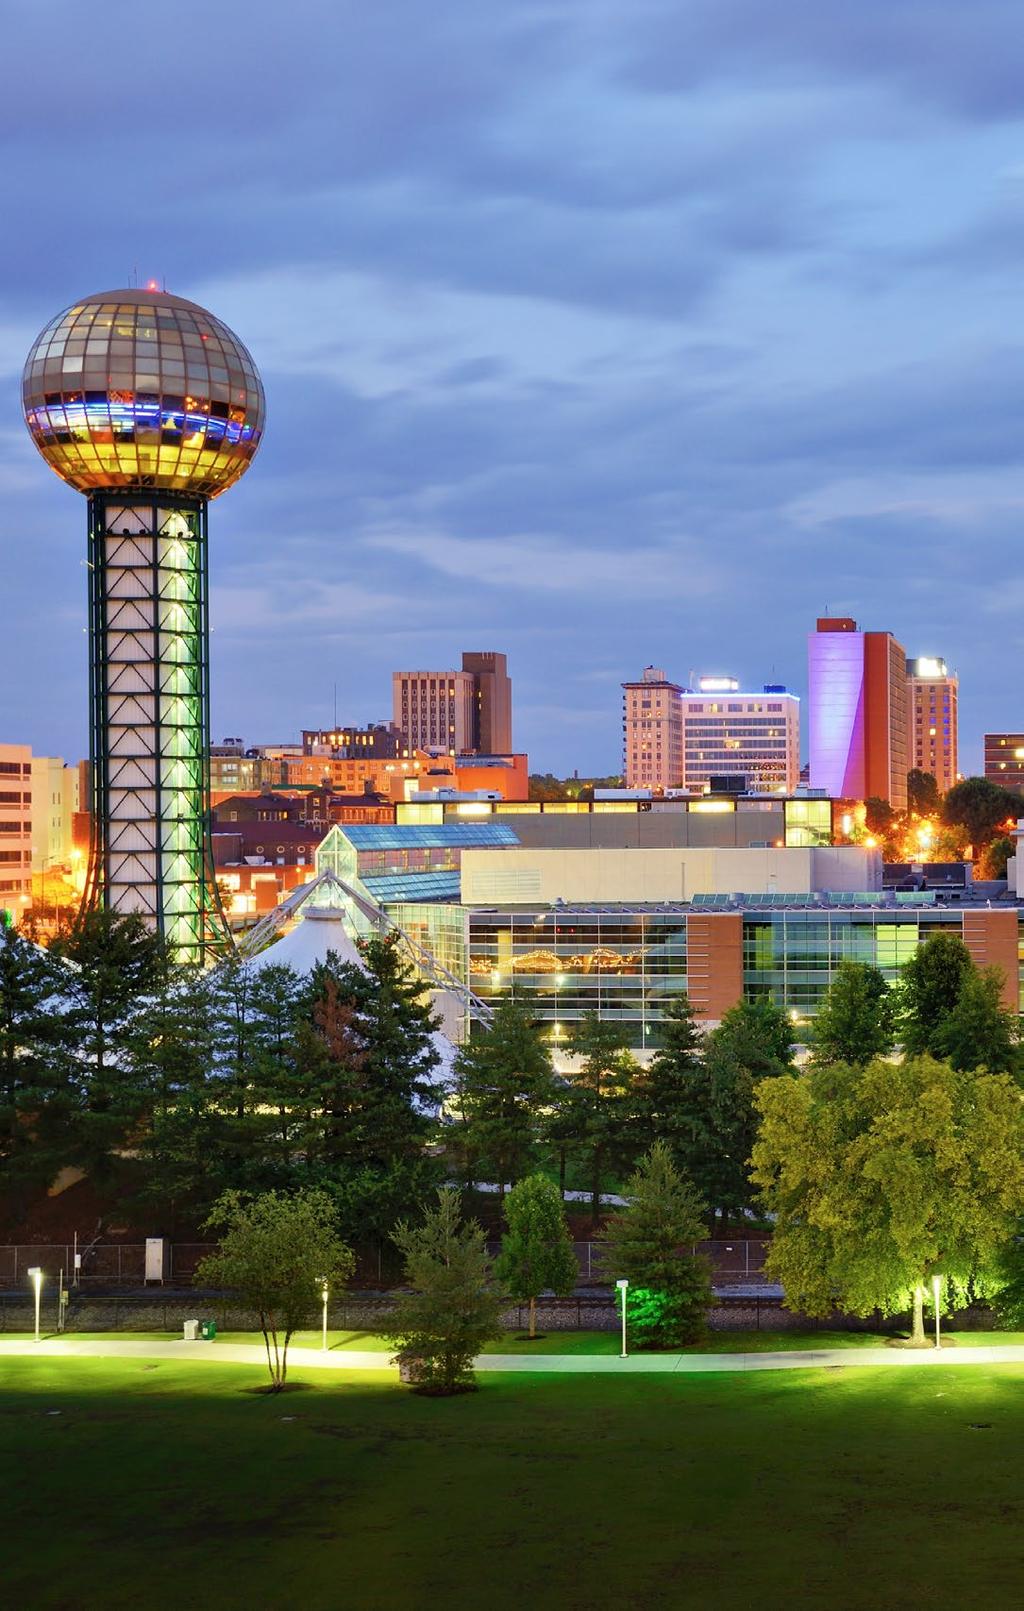 KNOXVILLE BEAUTIFUL FOR BUSINESS Knoxville, a gateway to the Great Smoky Mountains National Park, located in East Tennessee, has something for everyone including historical tours, outdoor adventures,